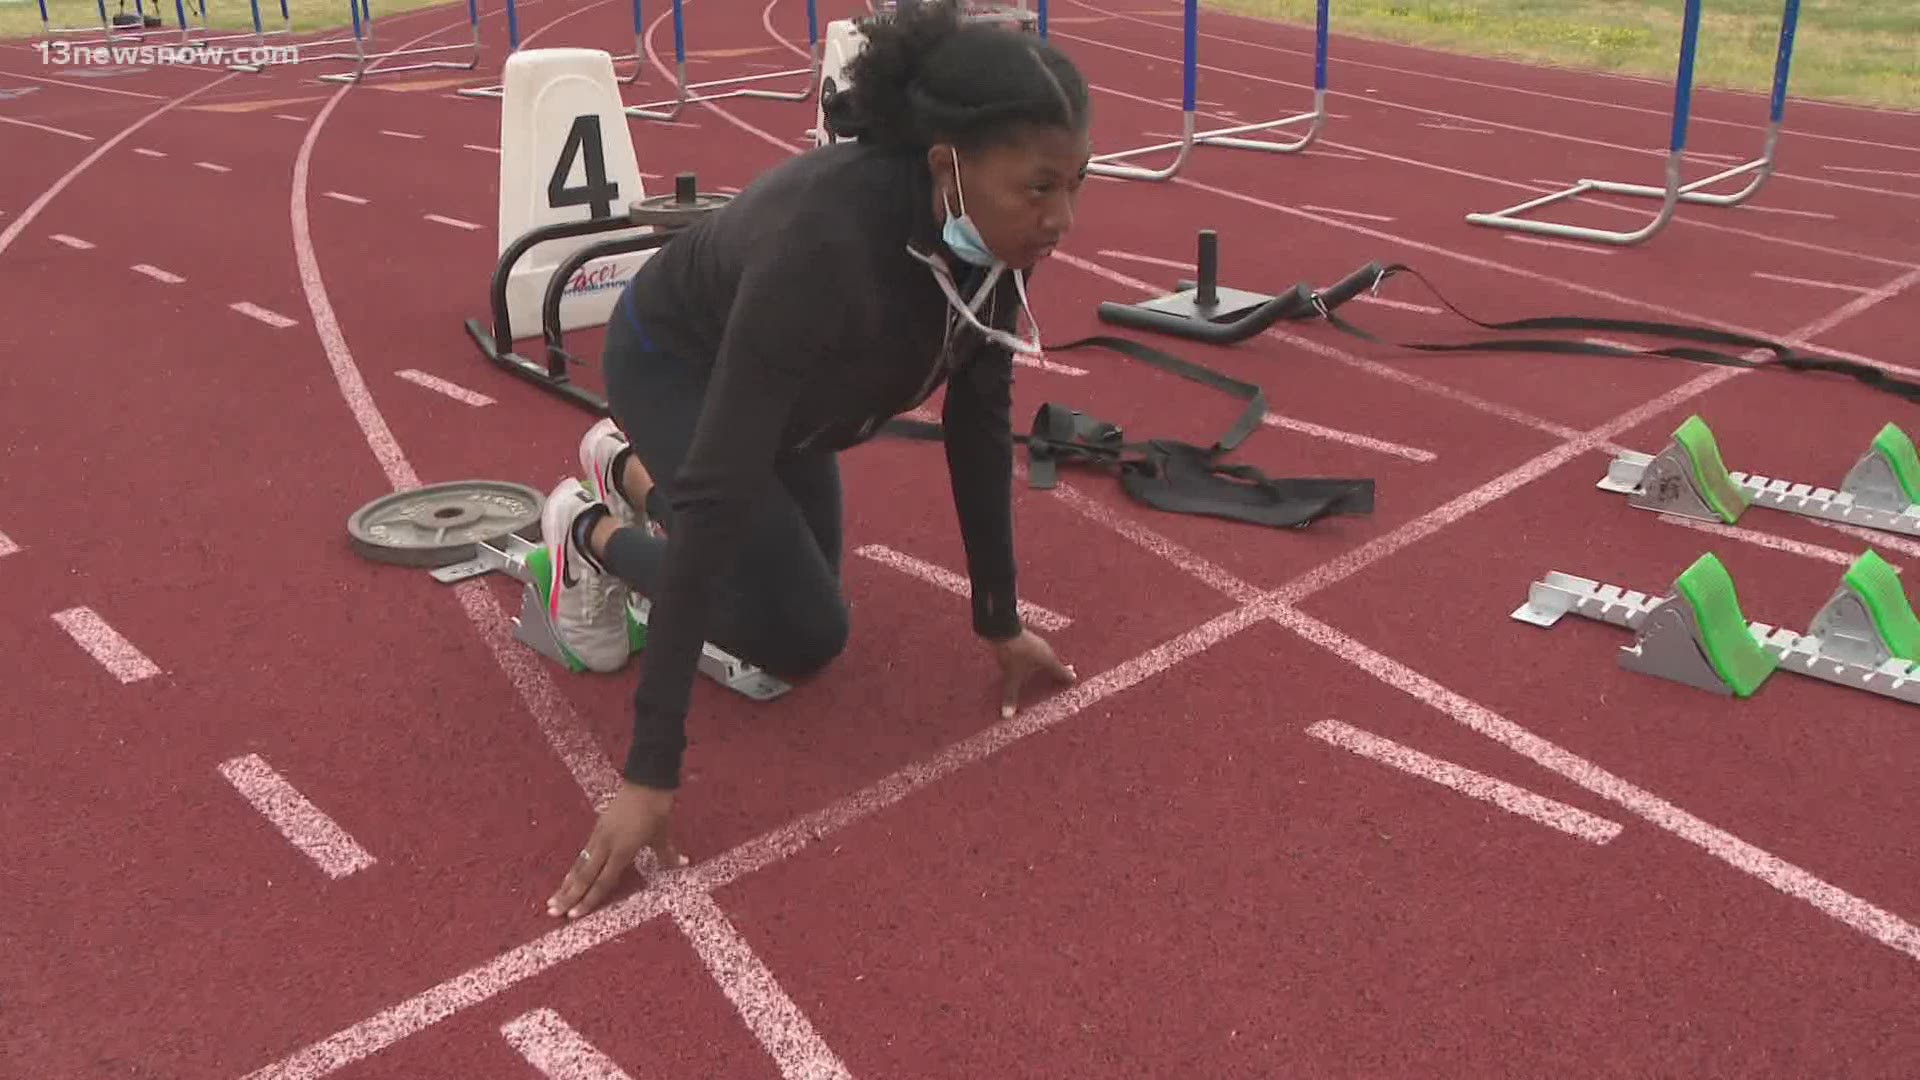 The reigning state champ in the 400 meters is headed to Tennessee on a track scholarship